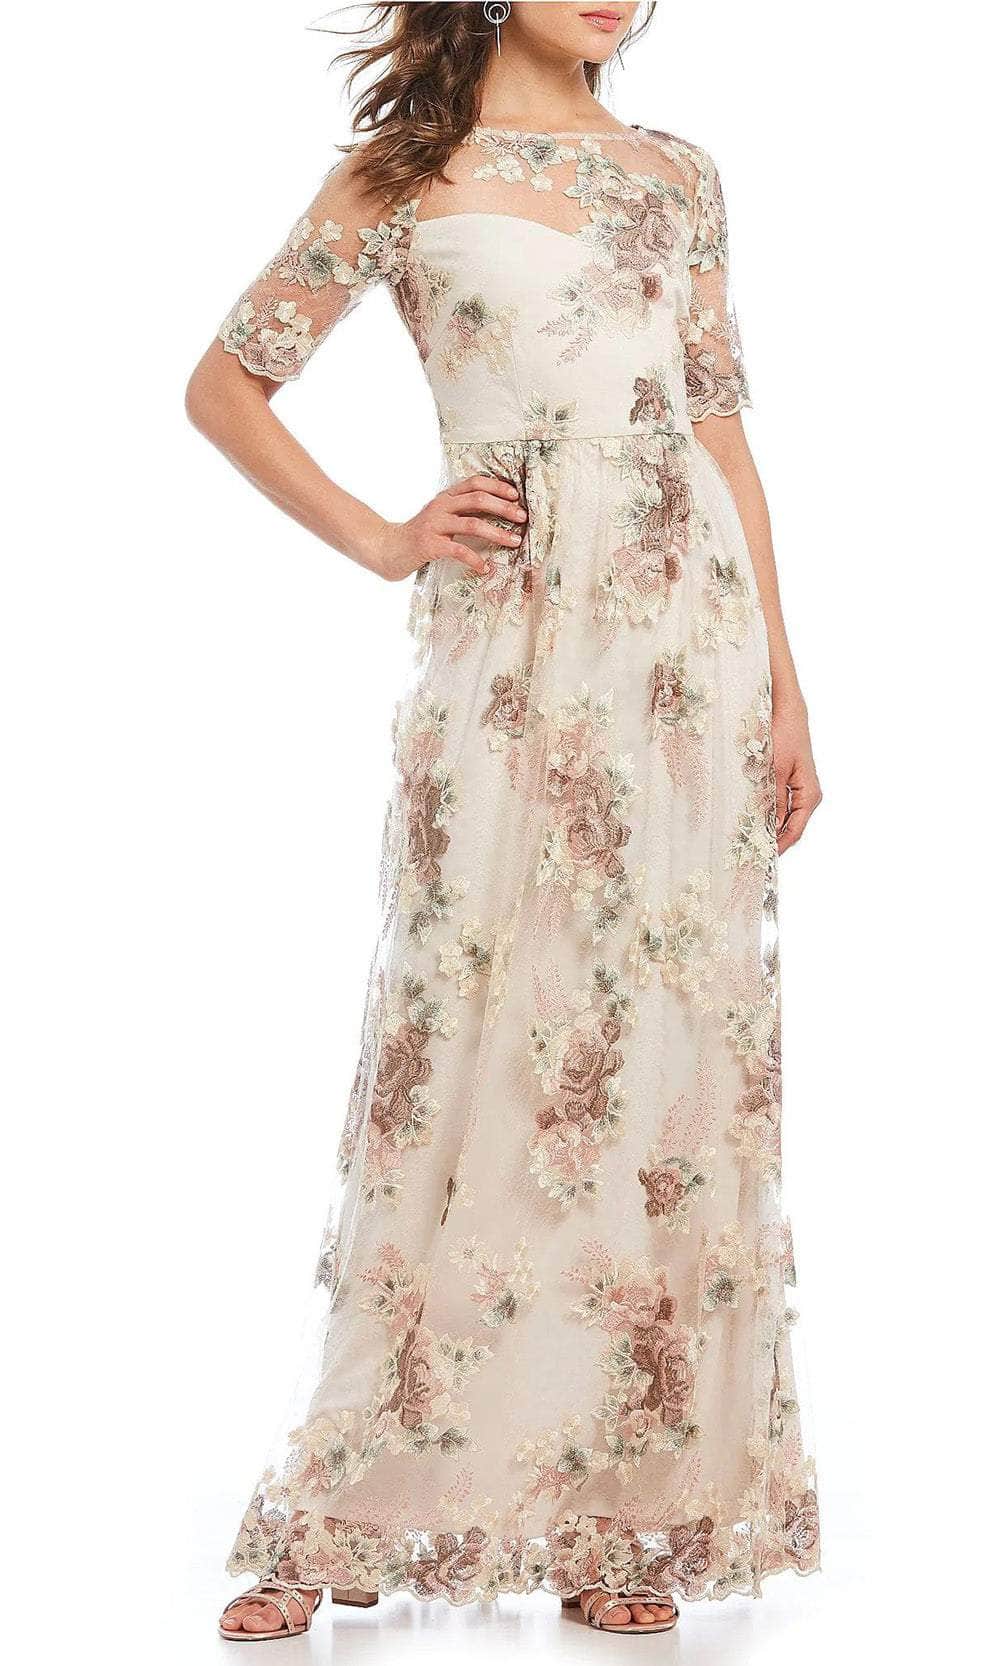 Adrianna Papell AP1E203576 - Illusion Sleeve Floral Evening Gown Special Occasion Dress 0 / Mink Multi